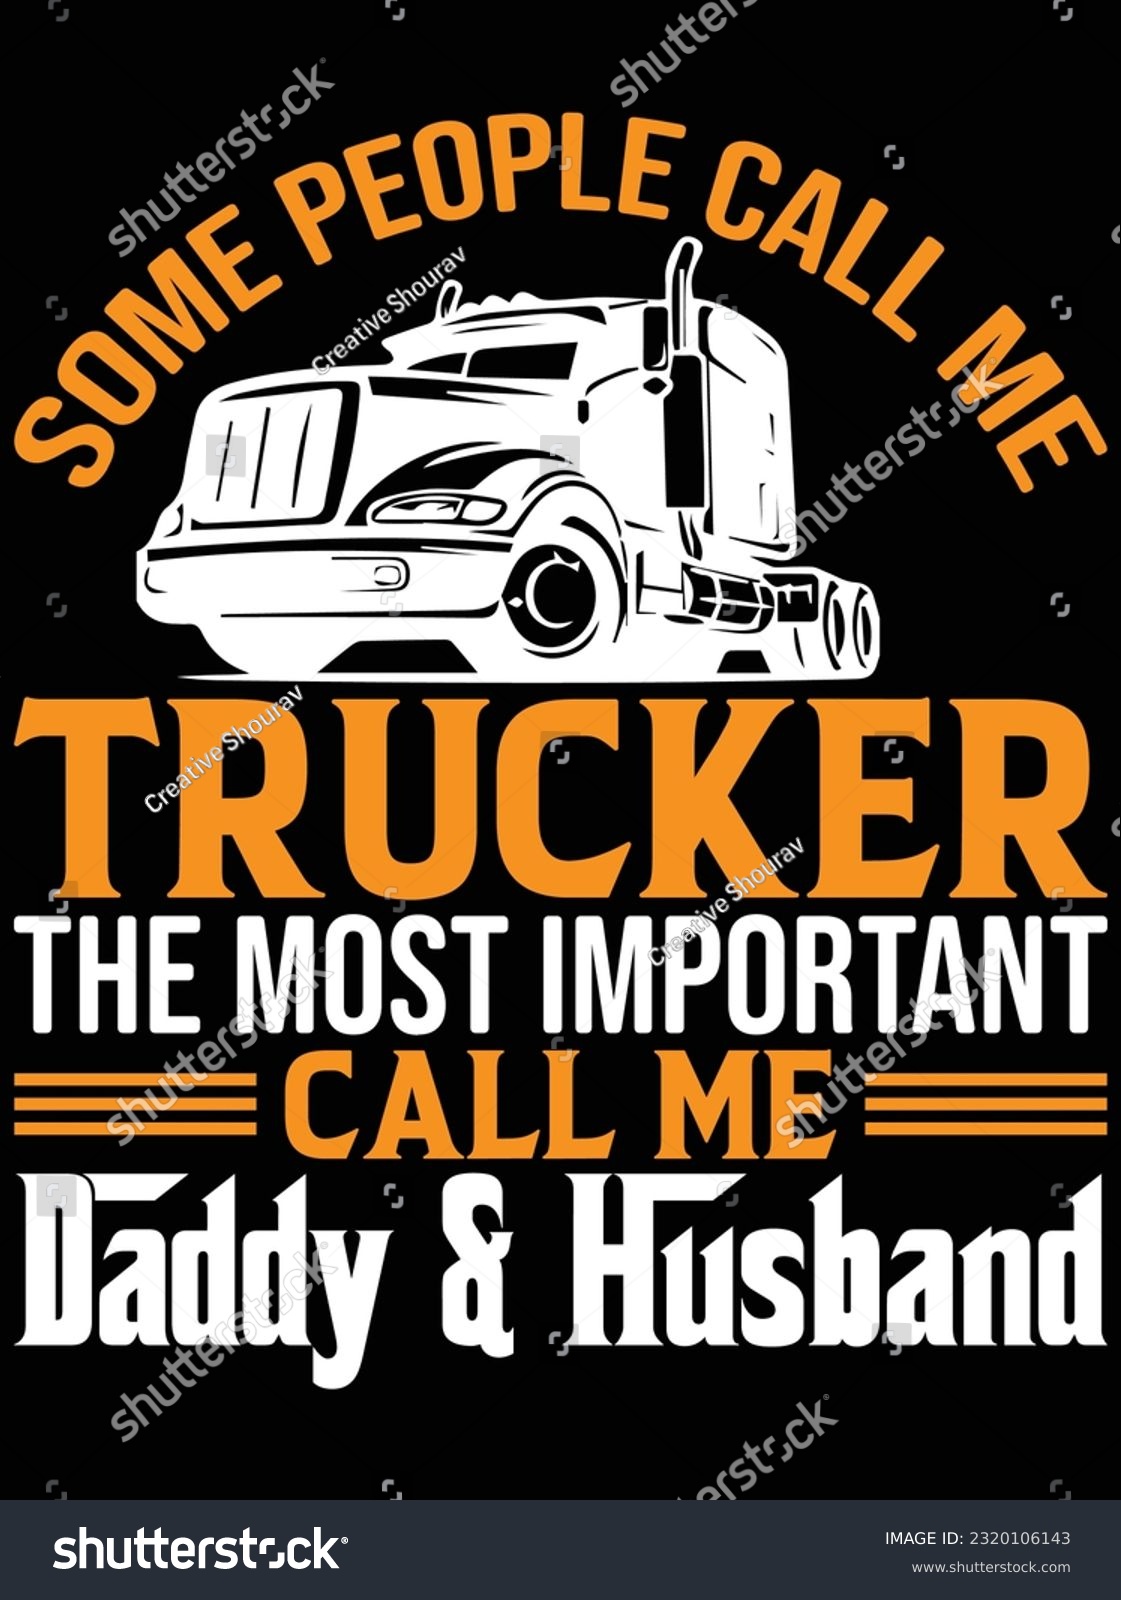 SVG of Some people call me trucker, calls me daddy and husband vector art design, eps file. design file for t-shirt. SVG, EPS cuttable design file svg